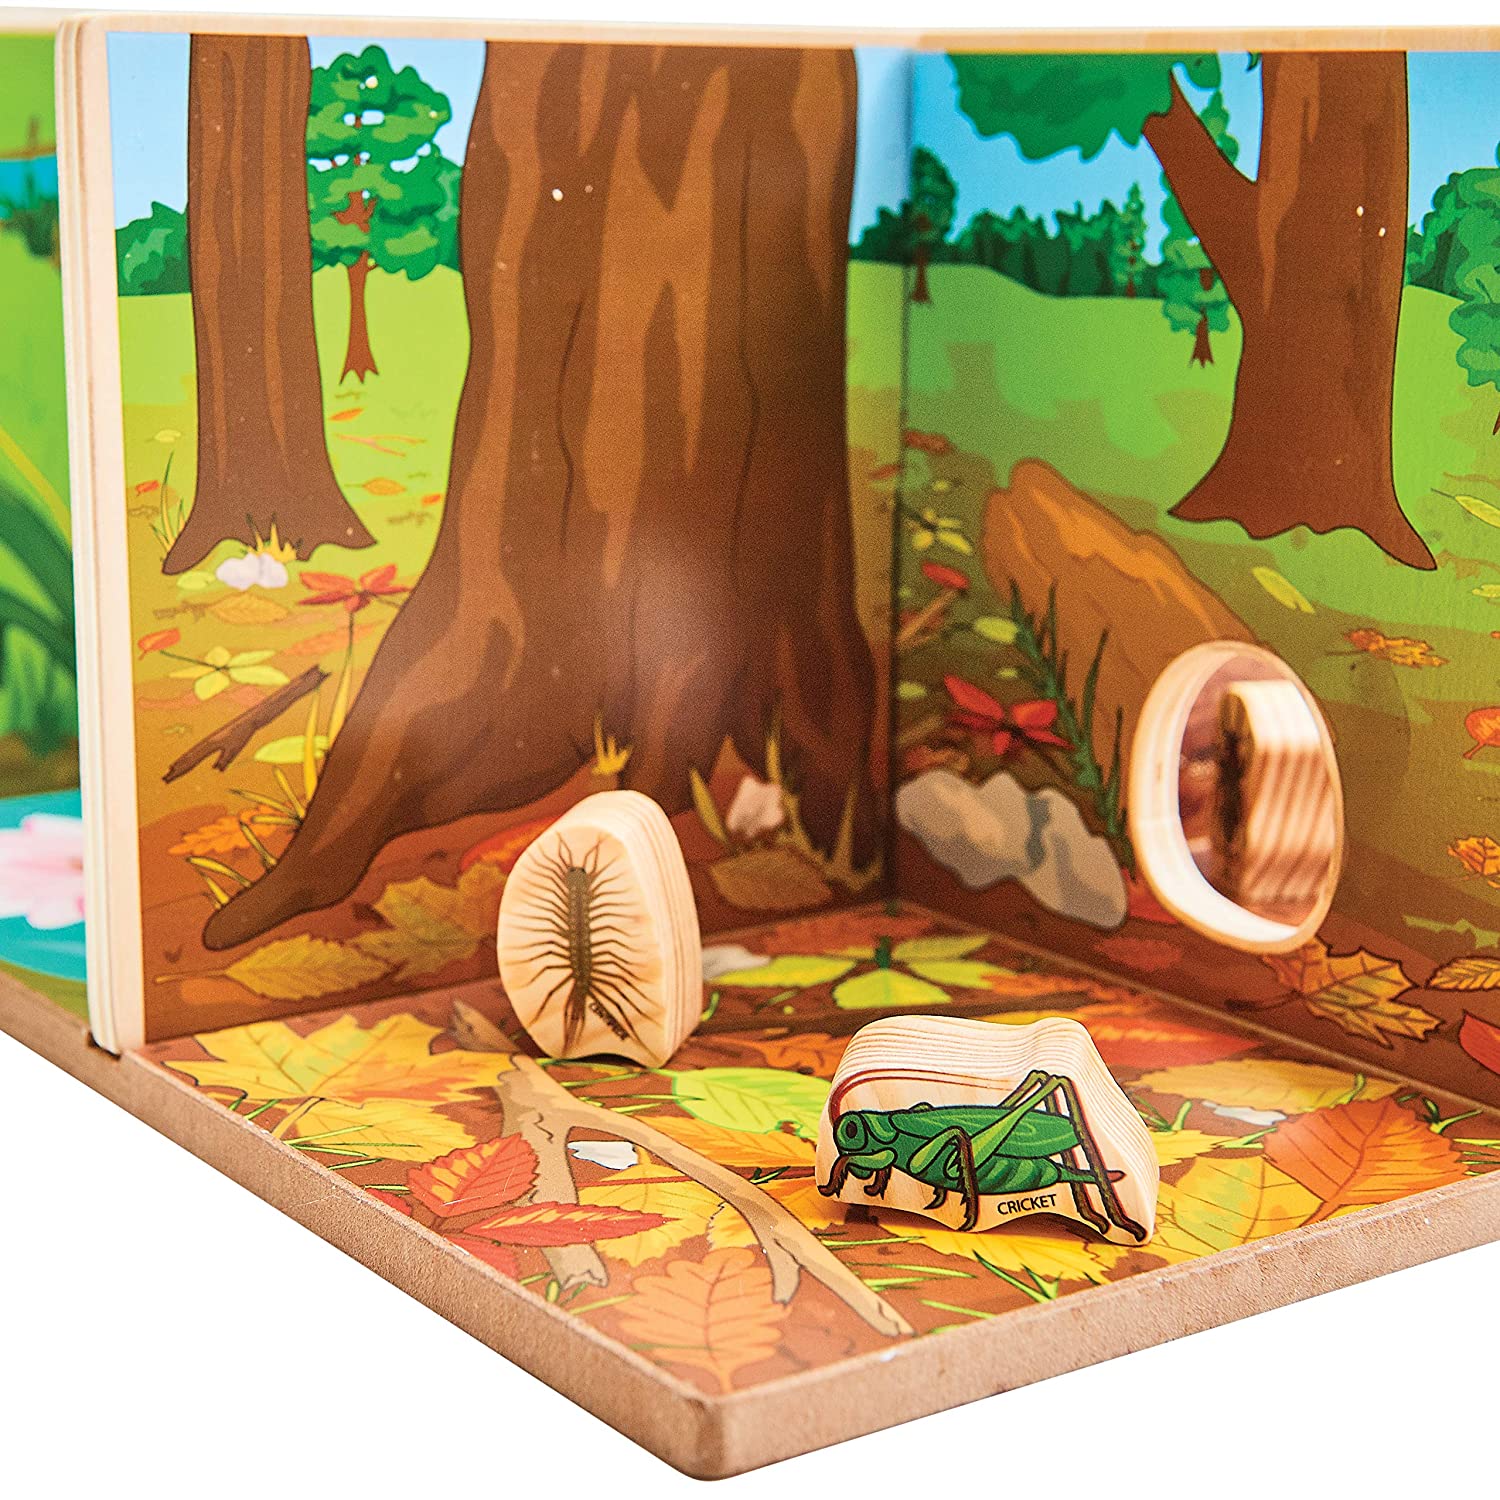 Pretend ’n’ Play Happy Minibeasts, Introducing the ultimate educational toy for curious young minds - the interactive minibeast scene set! This engaging and playful set includes 6 different interconnecting scenes, featuring a variety of fascinating minibeasts such as caterpillars, beetles, spiders, and worms, to name just a few. Your child will love learning all about the bugs in their environment while exploring the different parts of the set and engaging in imaginative play.With 15 pieces in total, includ